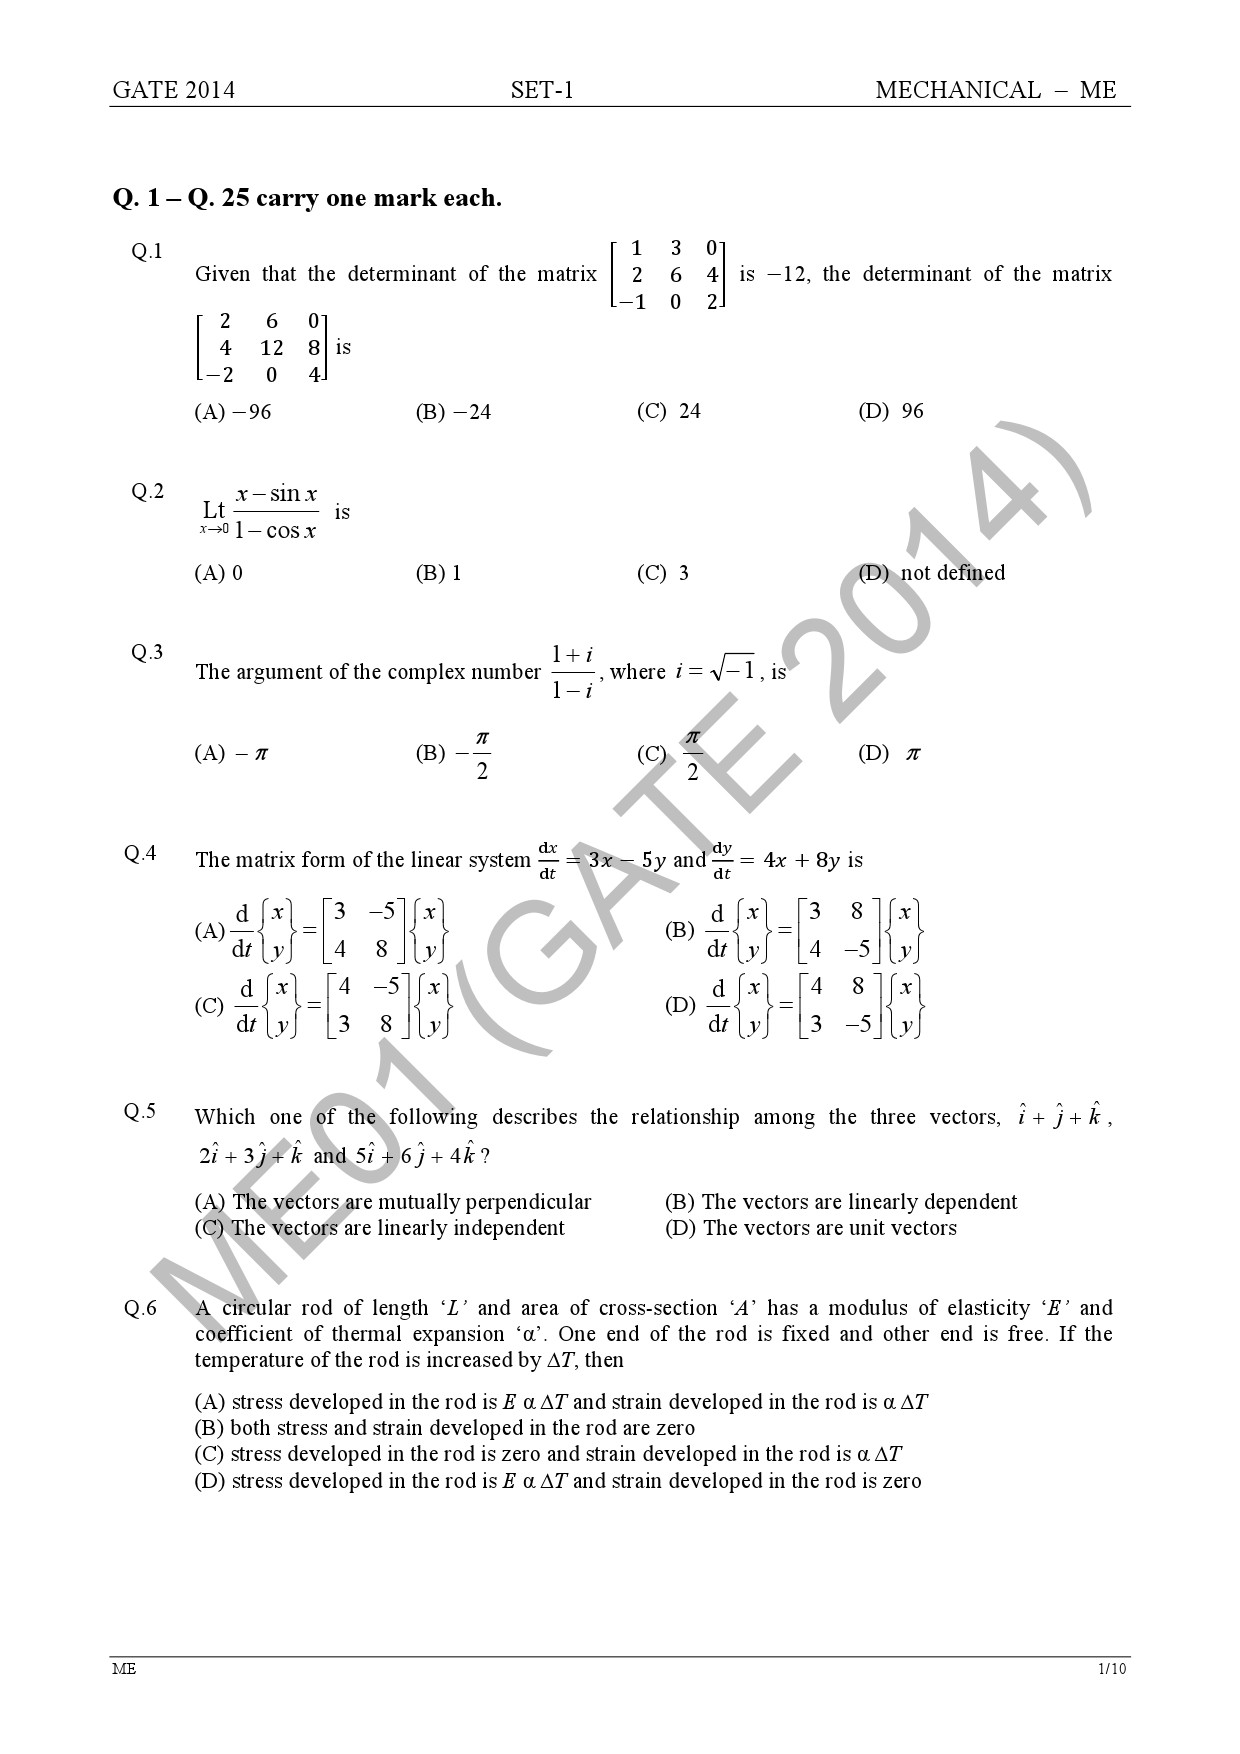 GATE Exam Question Paper 2014 Mechanical Engineering Set 1 7